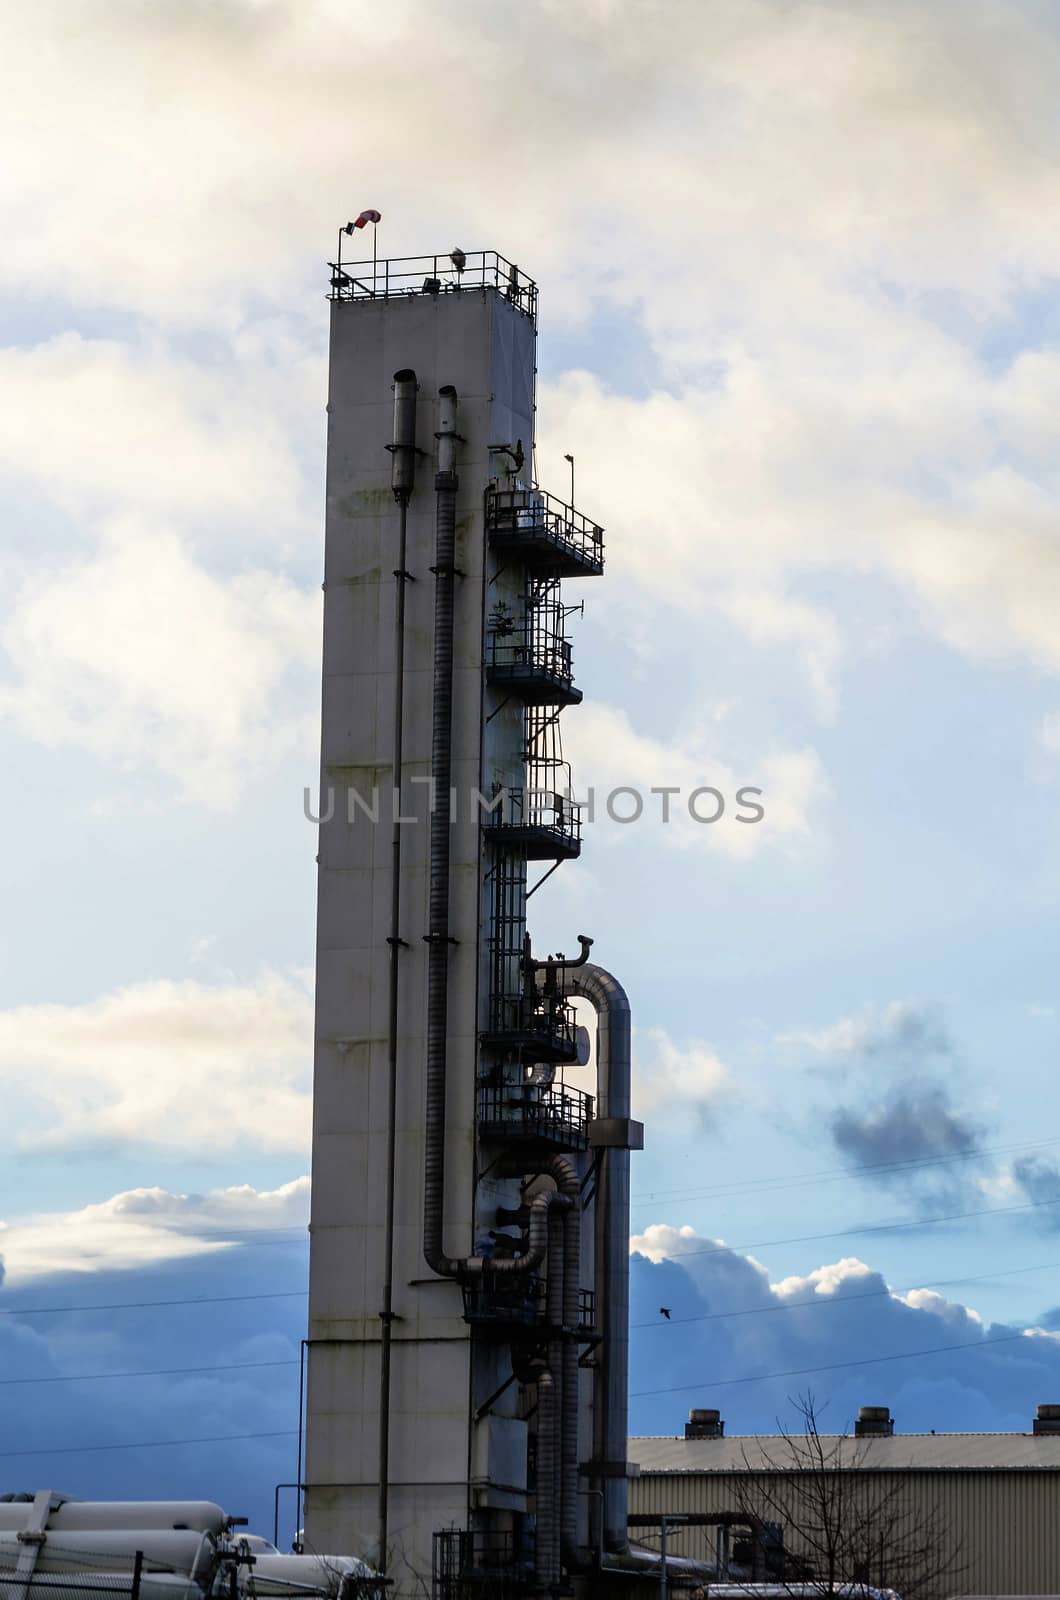 Tower, part of a large industrial plant for gas filling.